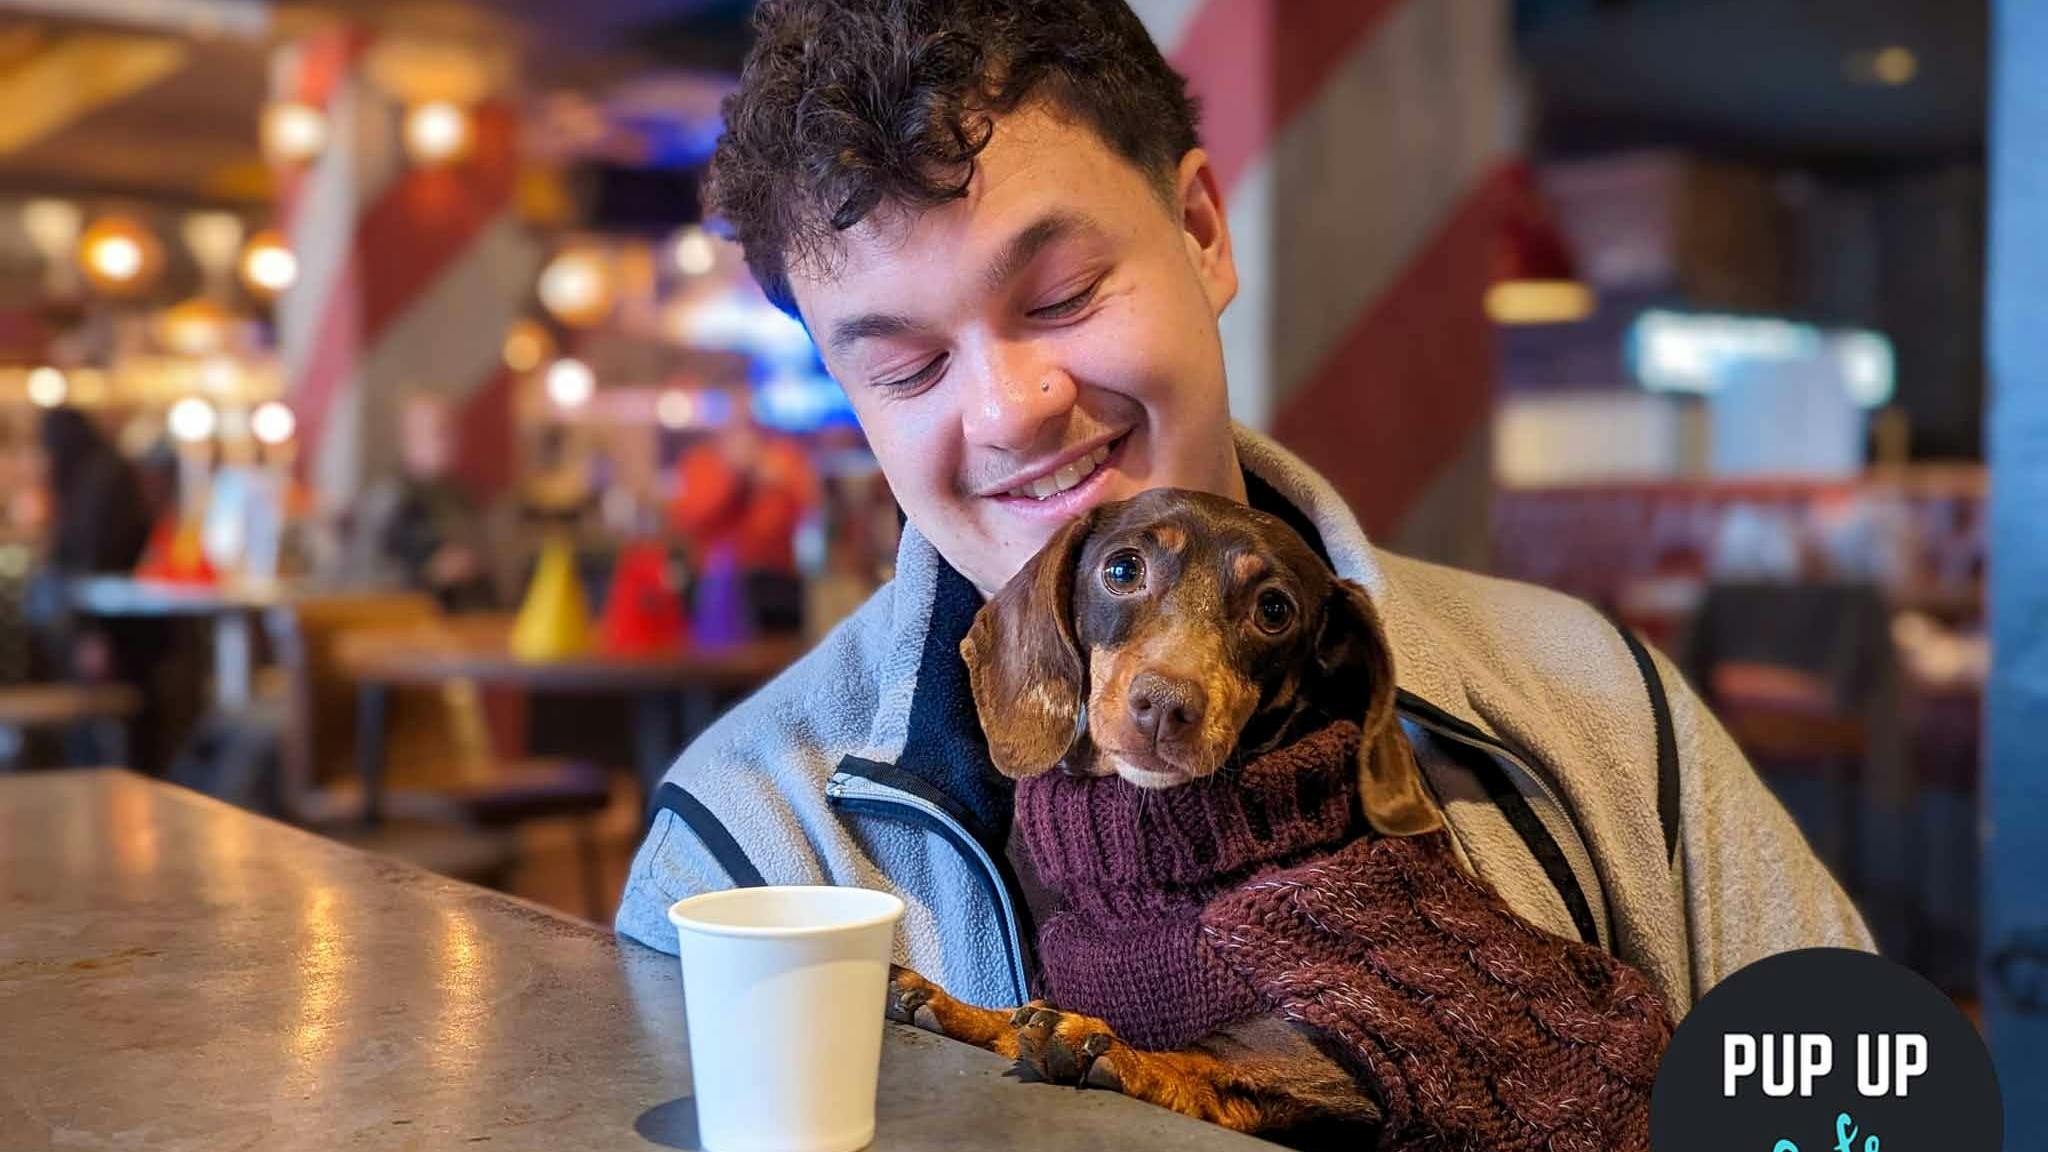 A sausage dog cafe with hundreds of cute dachshund puppies is coming to Manchester